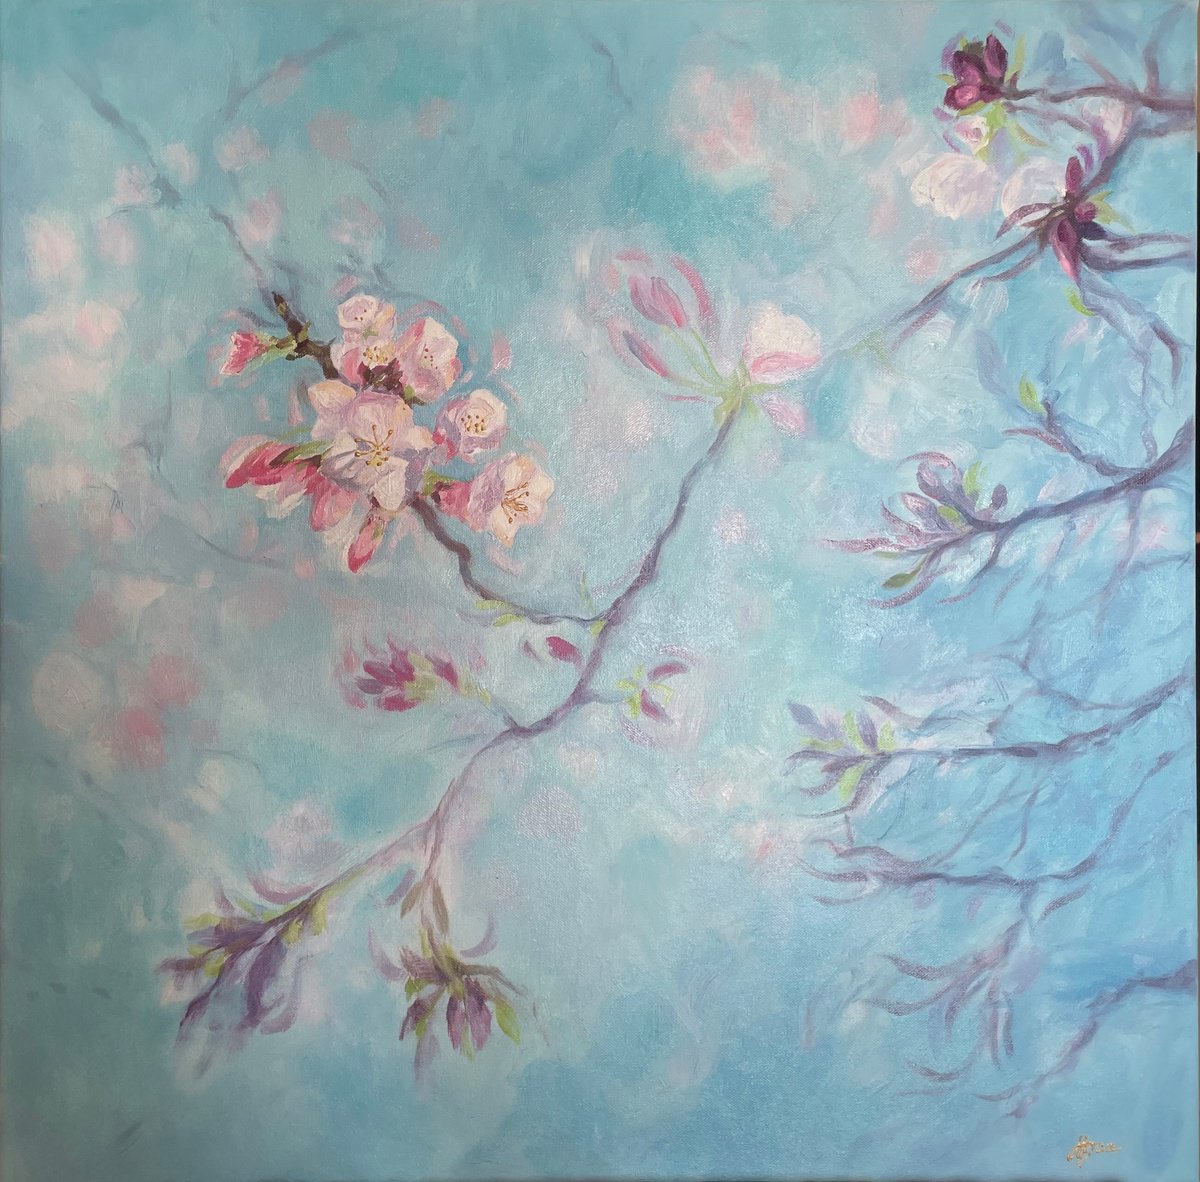 A Calm Spring Day Blossom by Hannah Bruce